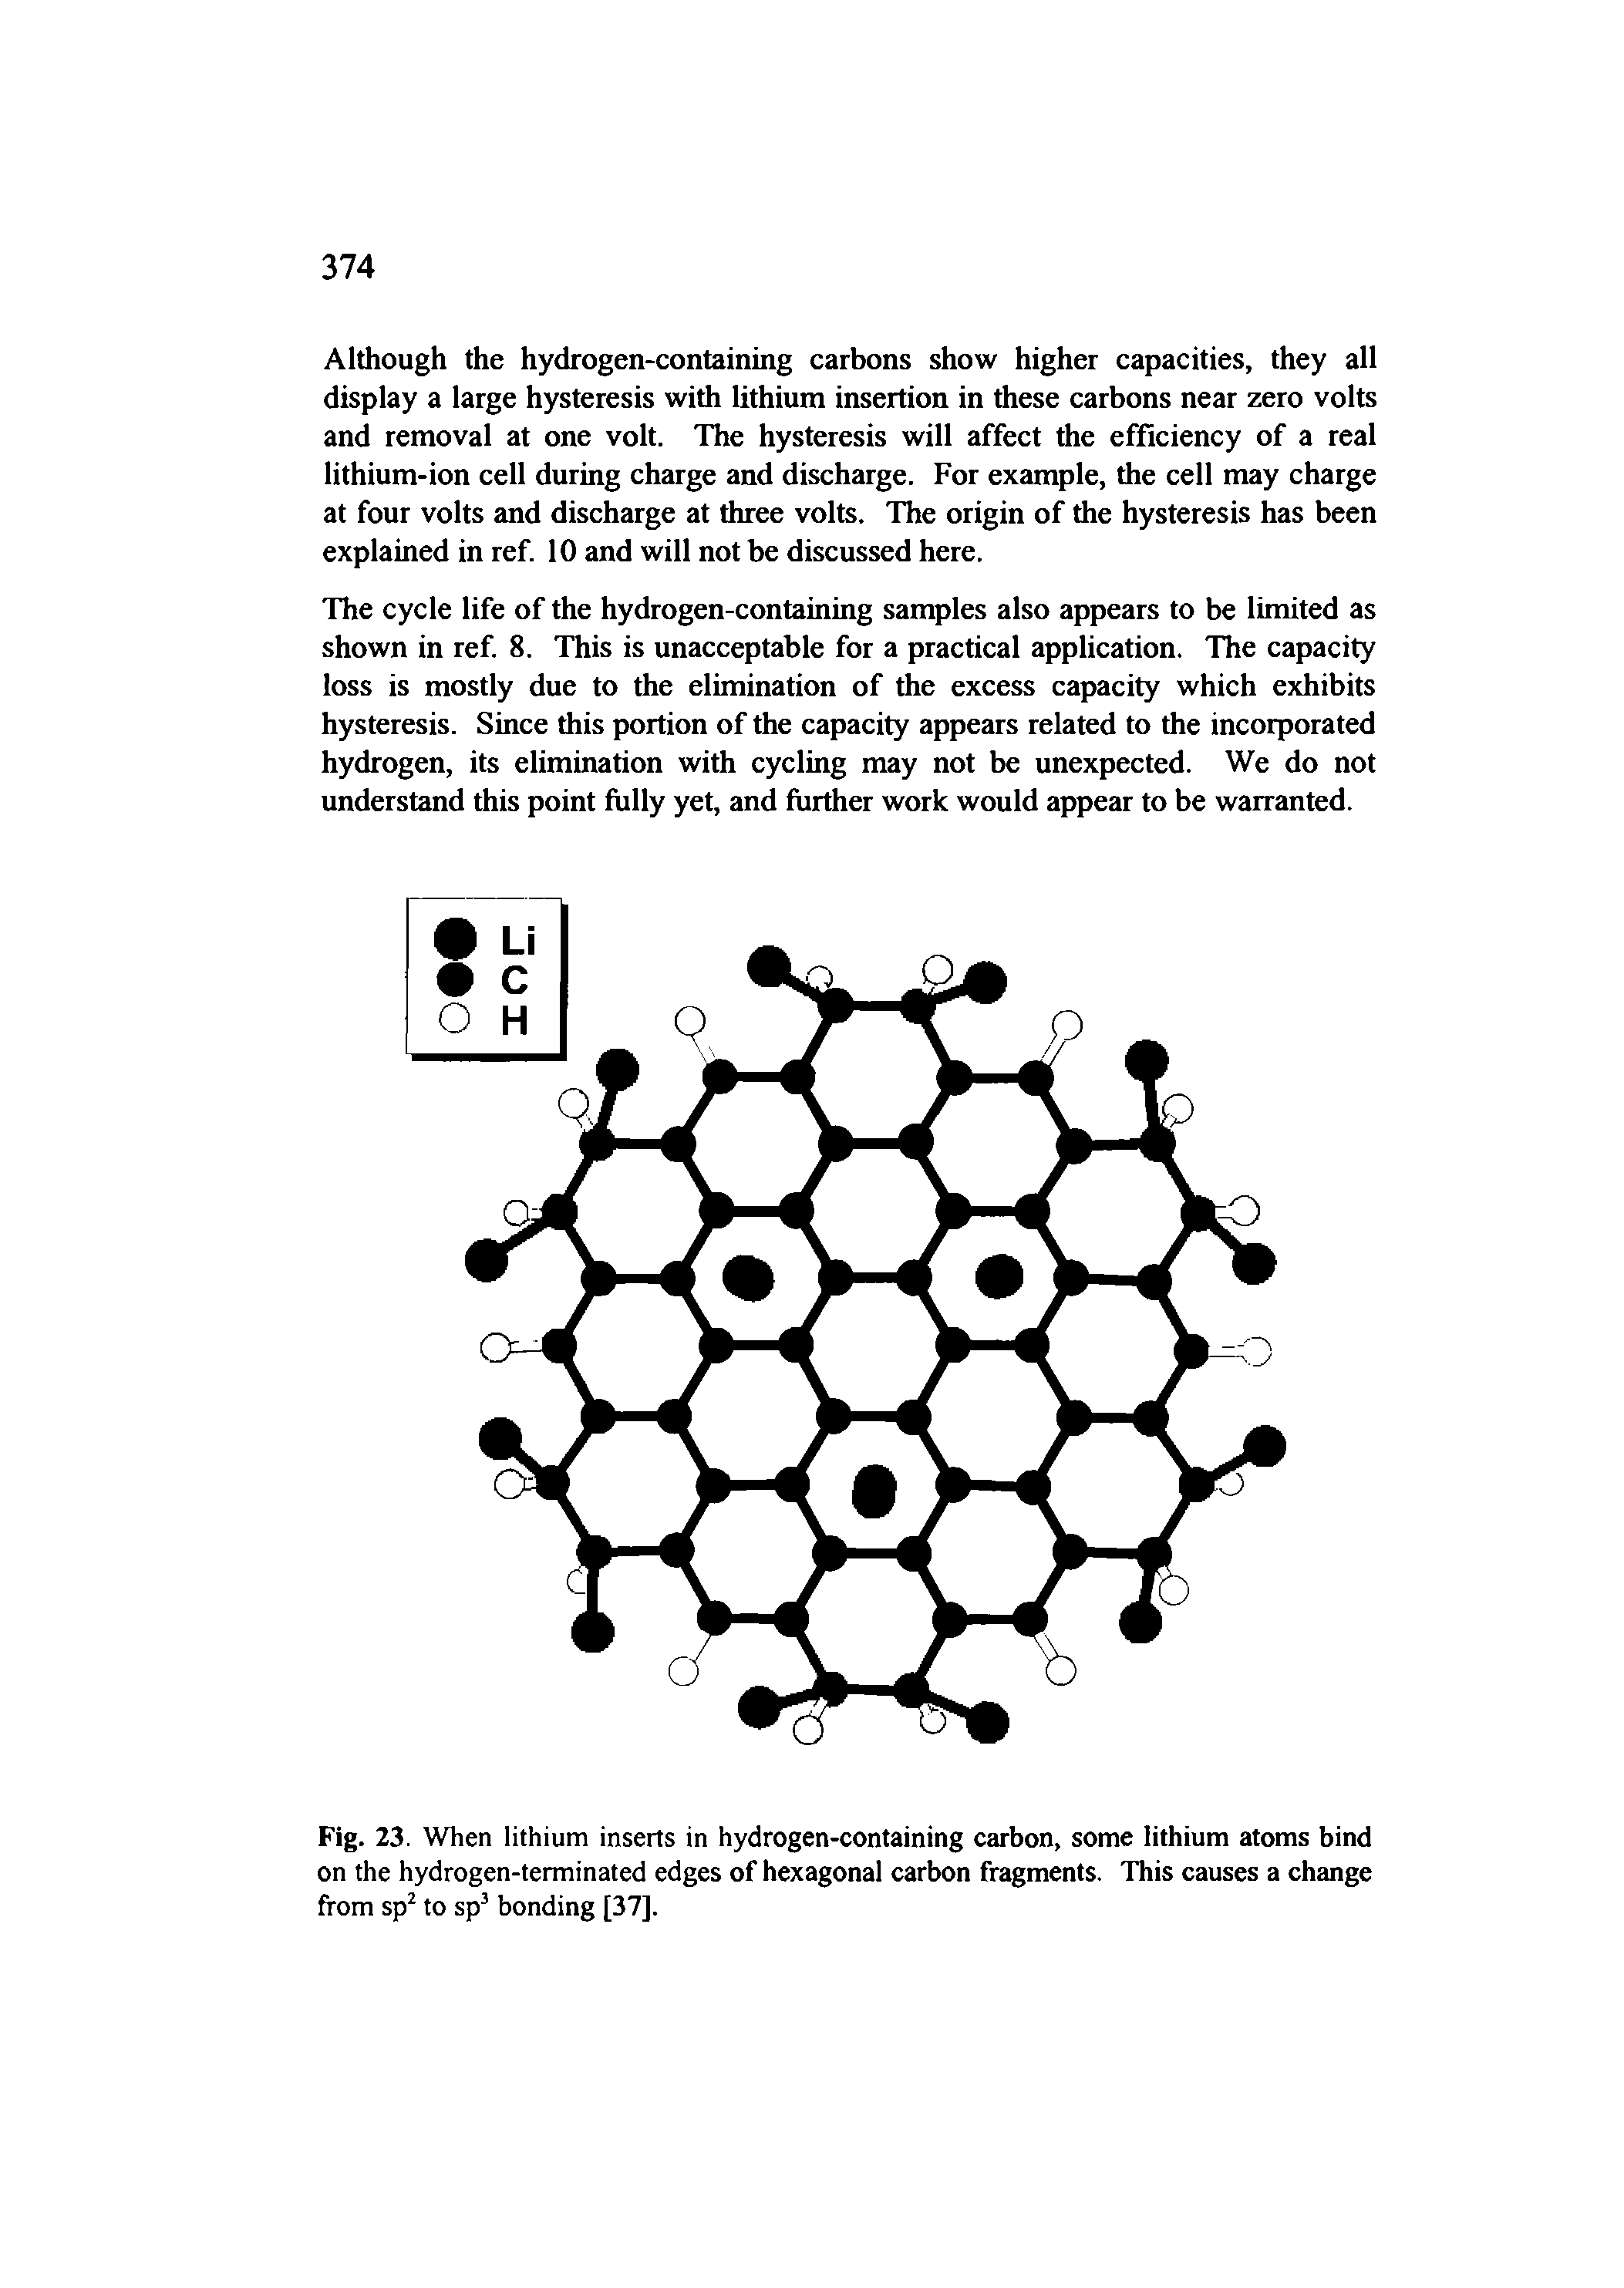 Fig. 23. When lithium inserts in hydrogen-containing carbon, some lithium atoms bind on the hydrogen-terminated edges of hexagonal carbon fragments. This causes a change from sp2 to sp3 bonding [37].